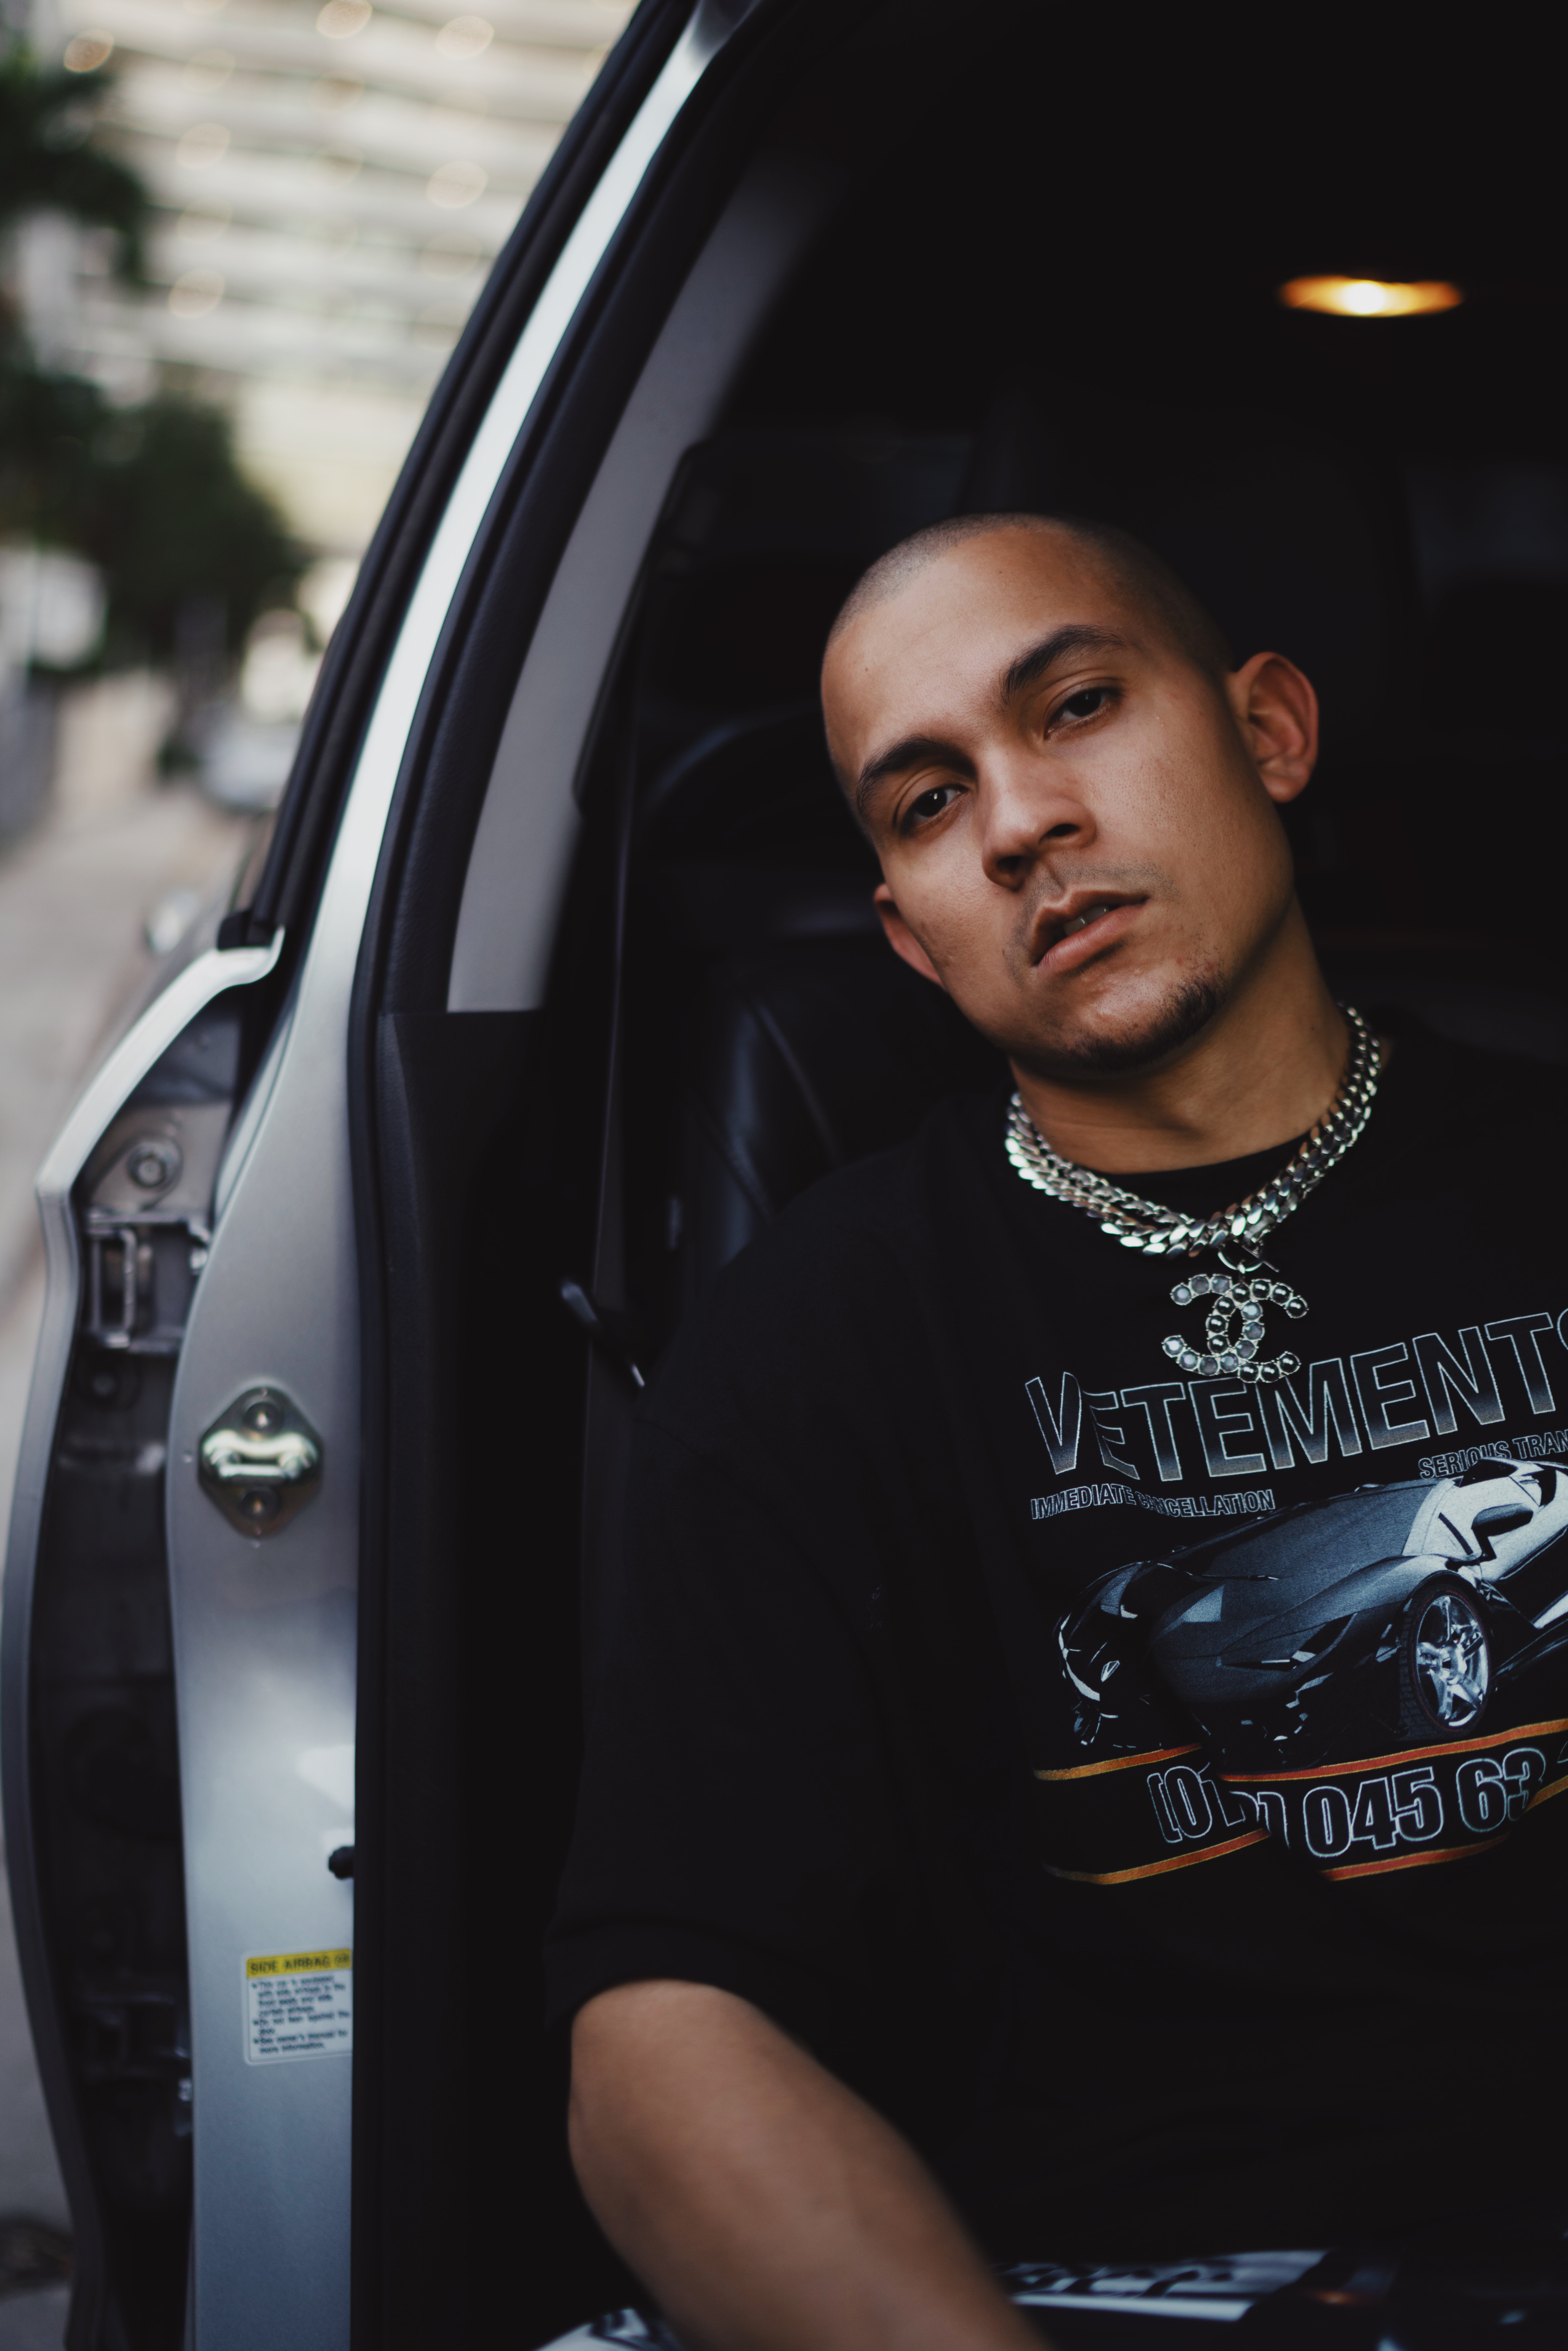 After Revolutionizing Reggaeton, Tainy Is Ready for His Own Album